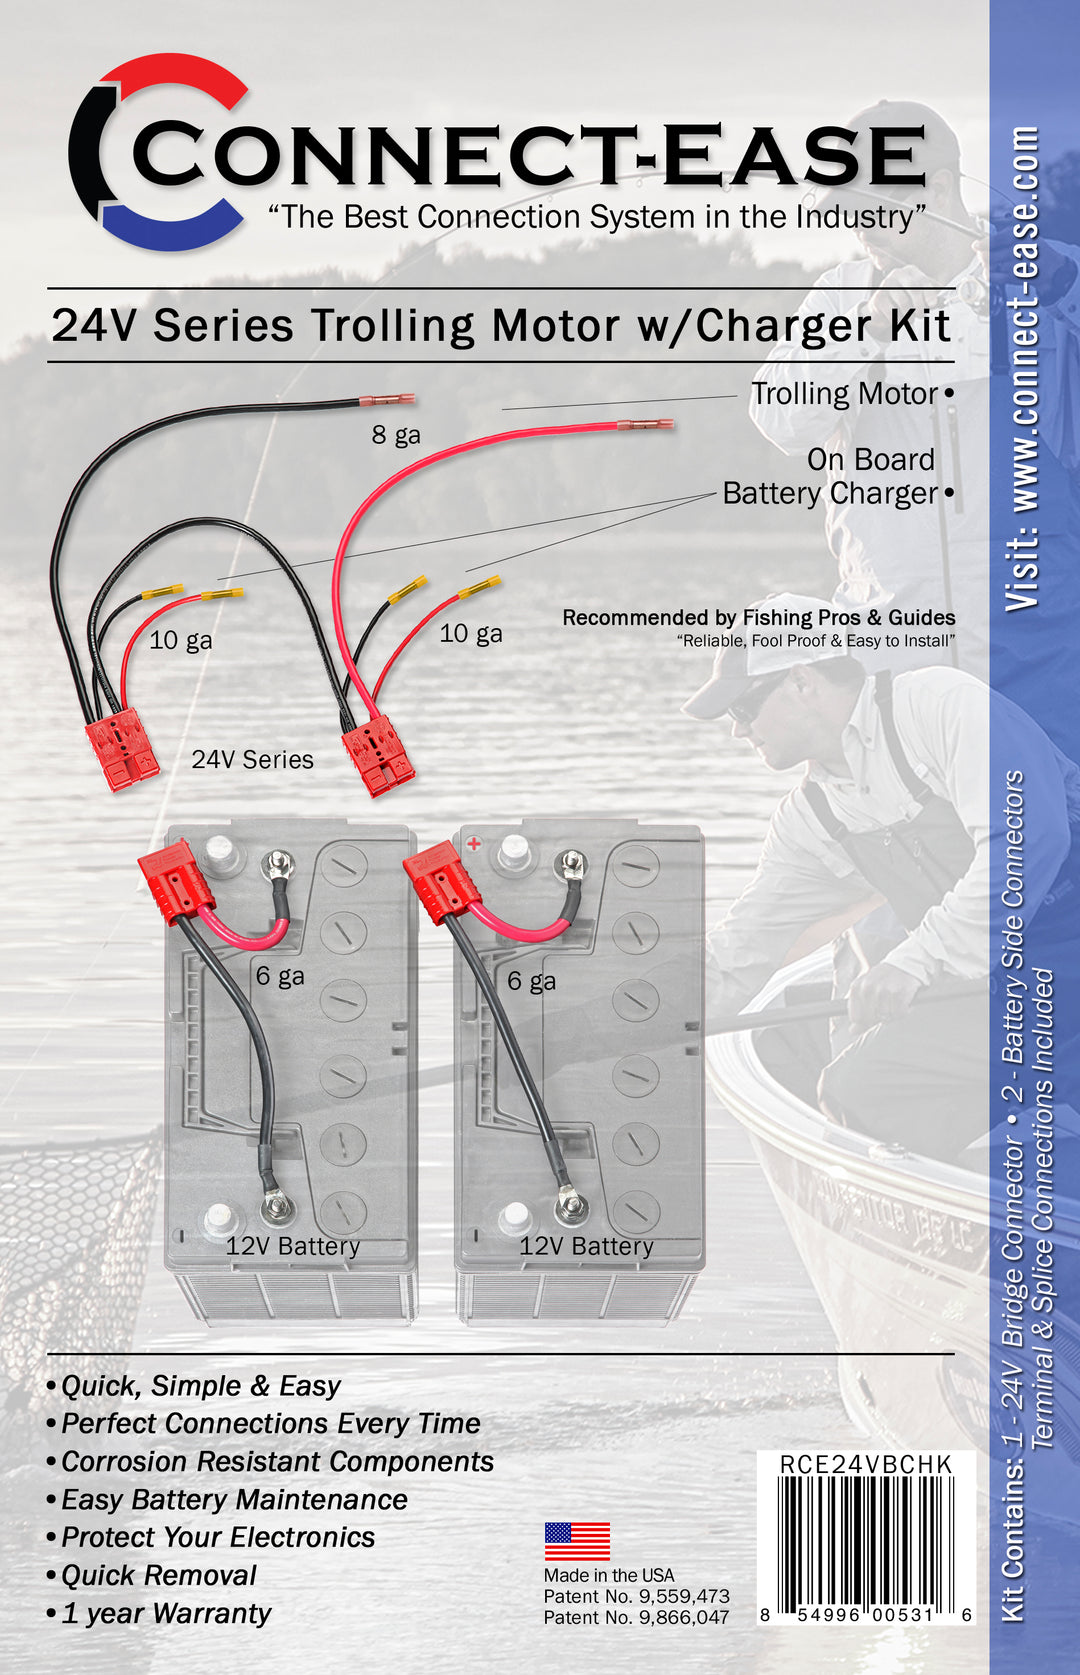 24 Volt Series Trolling Motor Connection Kit with On-Board Charging (RCE24VBCHK) - Connect-Ease. Connect all your marine equipment with ease.